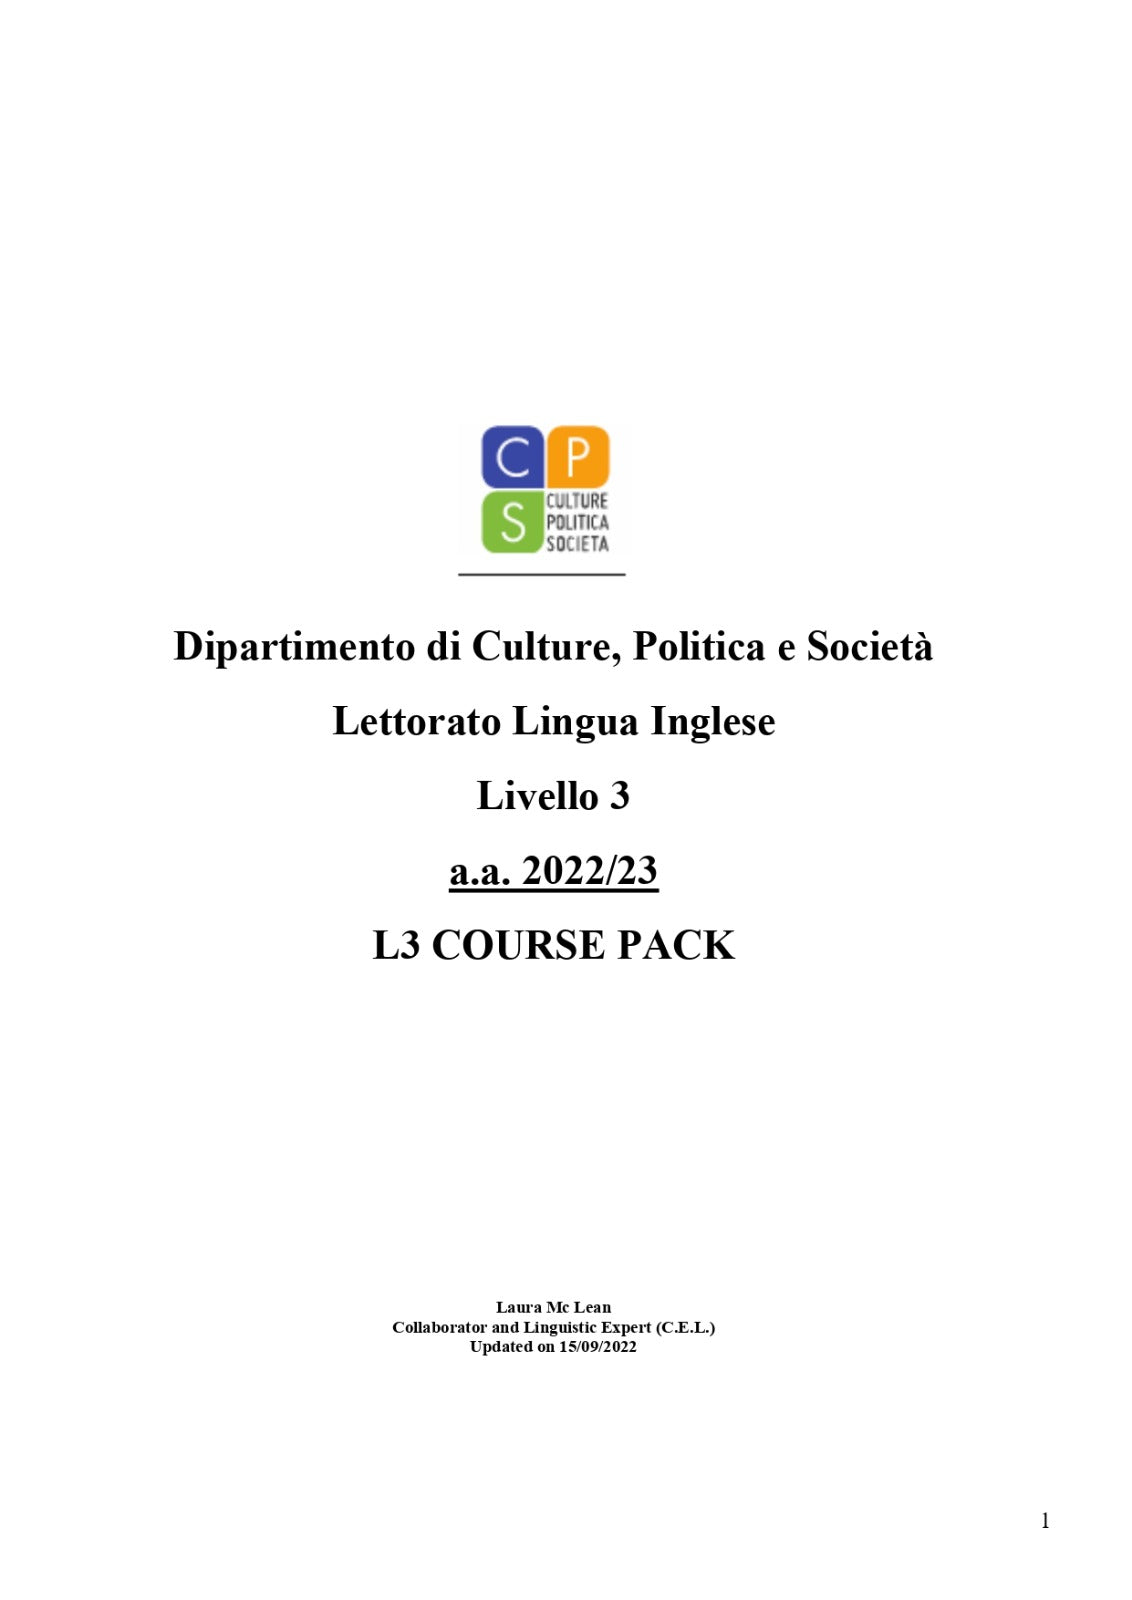 L3 Course Pack